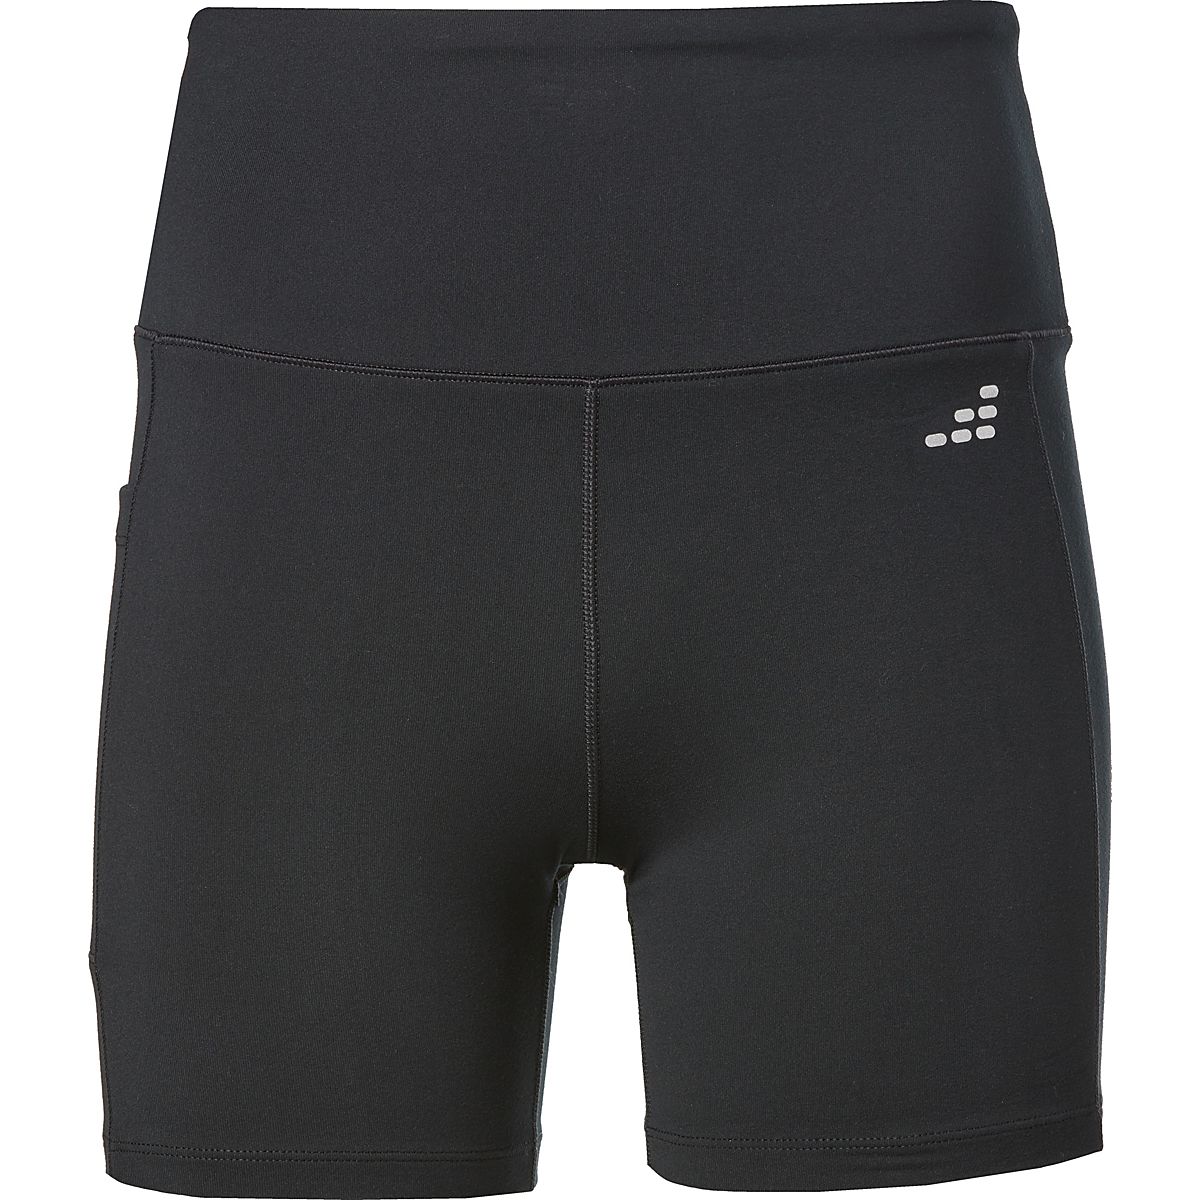 BCG Women's Hi Rise Bike Shorts 5 in | Free Shipping at Academy